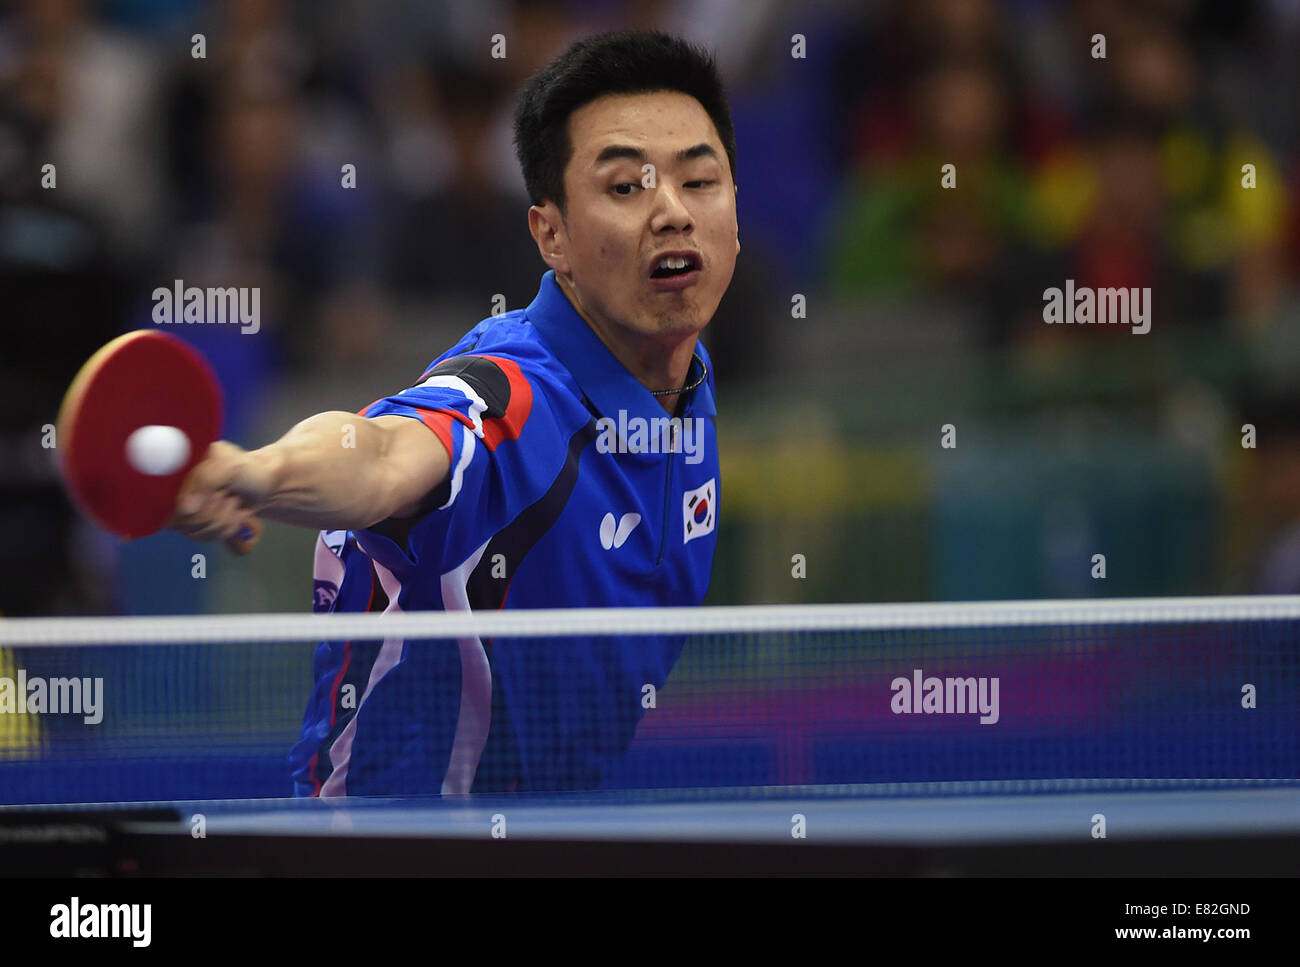 Incheon, South Korea. 29th Sep, 2014. Joo Saehyuk of South Korea competes  during the men's table tennis team semifinal match against Chinese Taipei  at the 17th Asian Games in Incheon, South Korea,